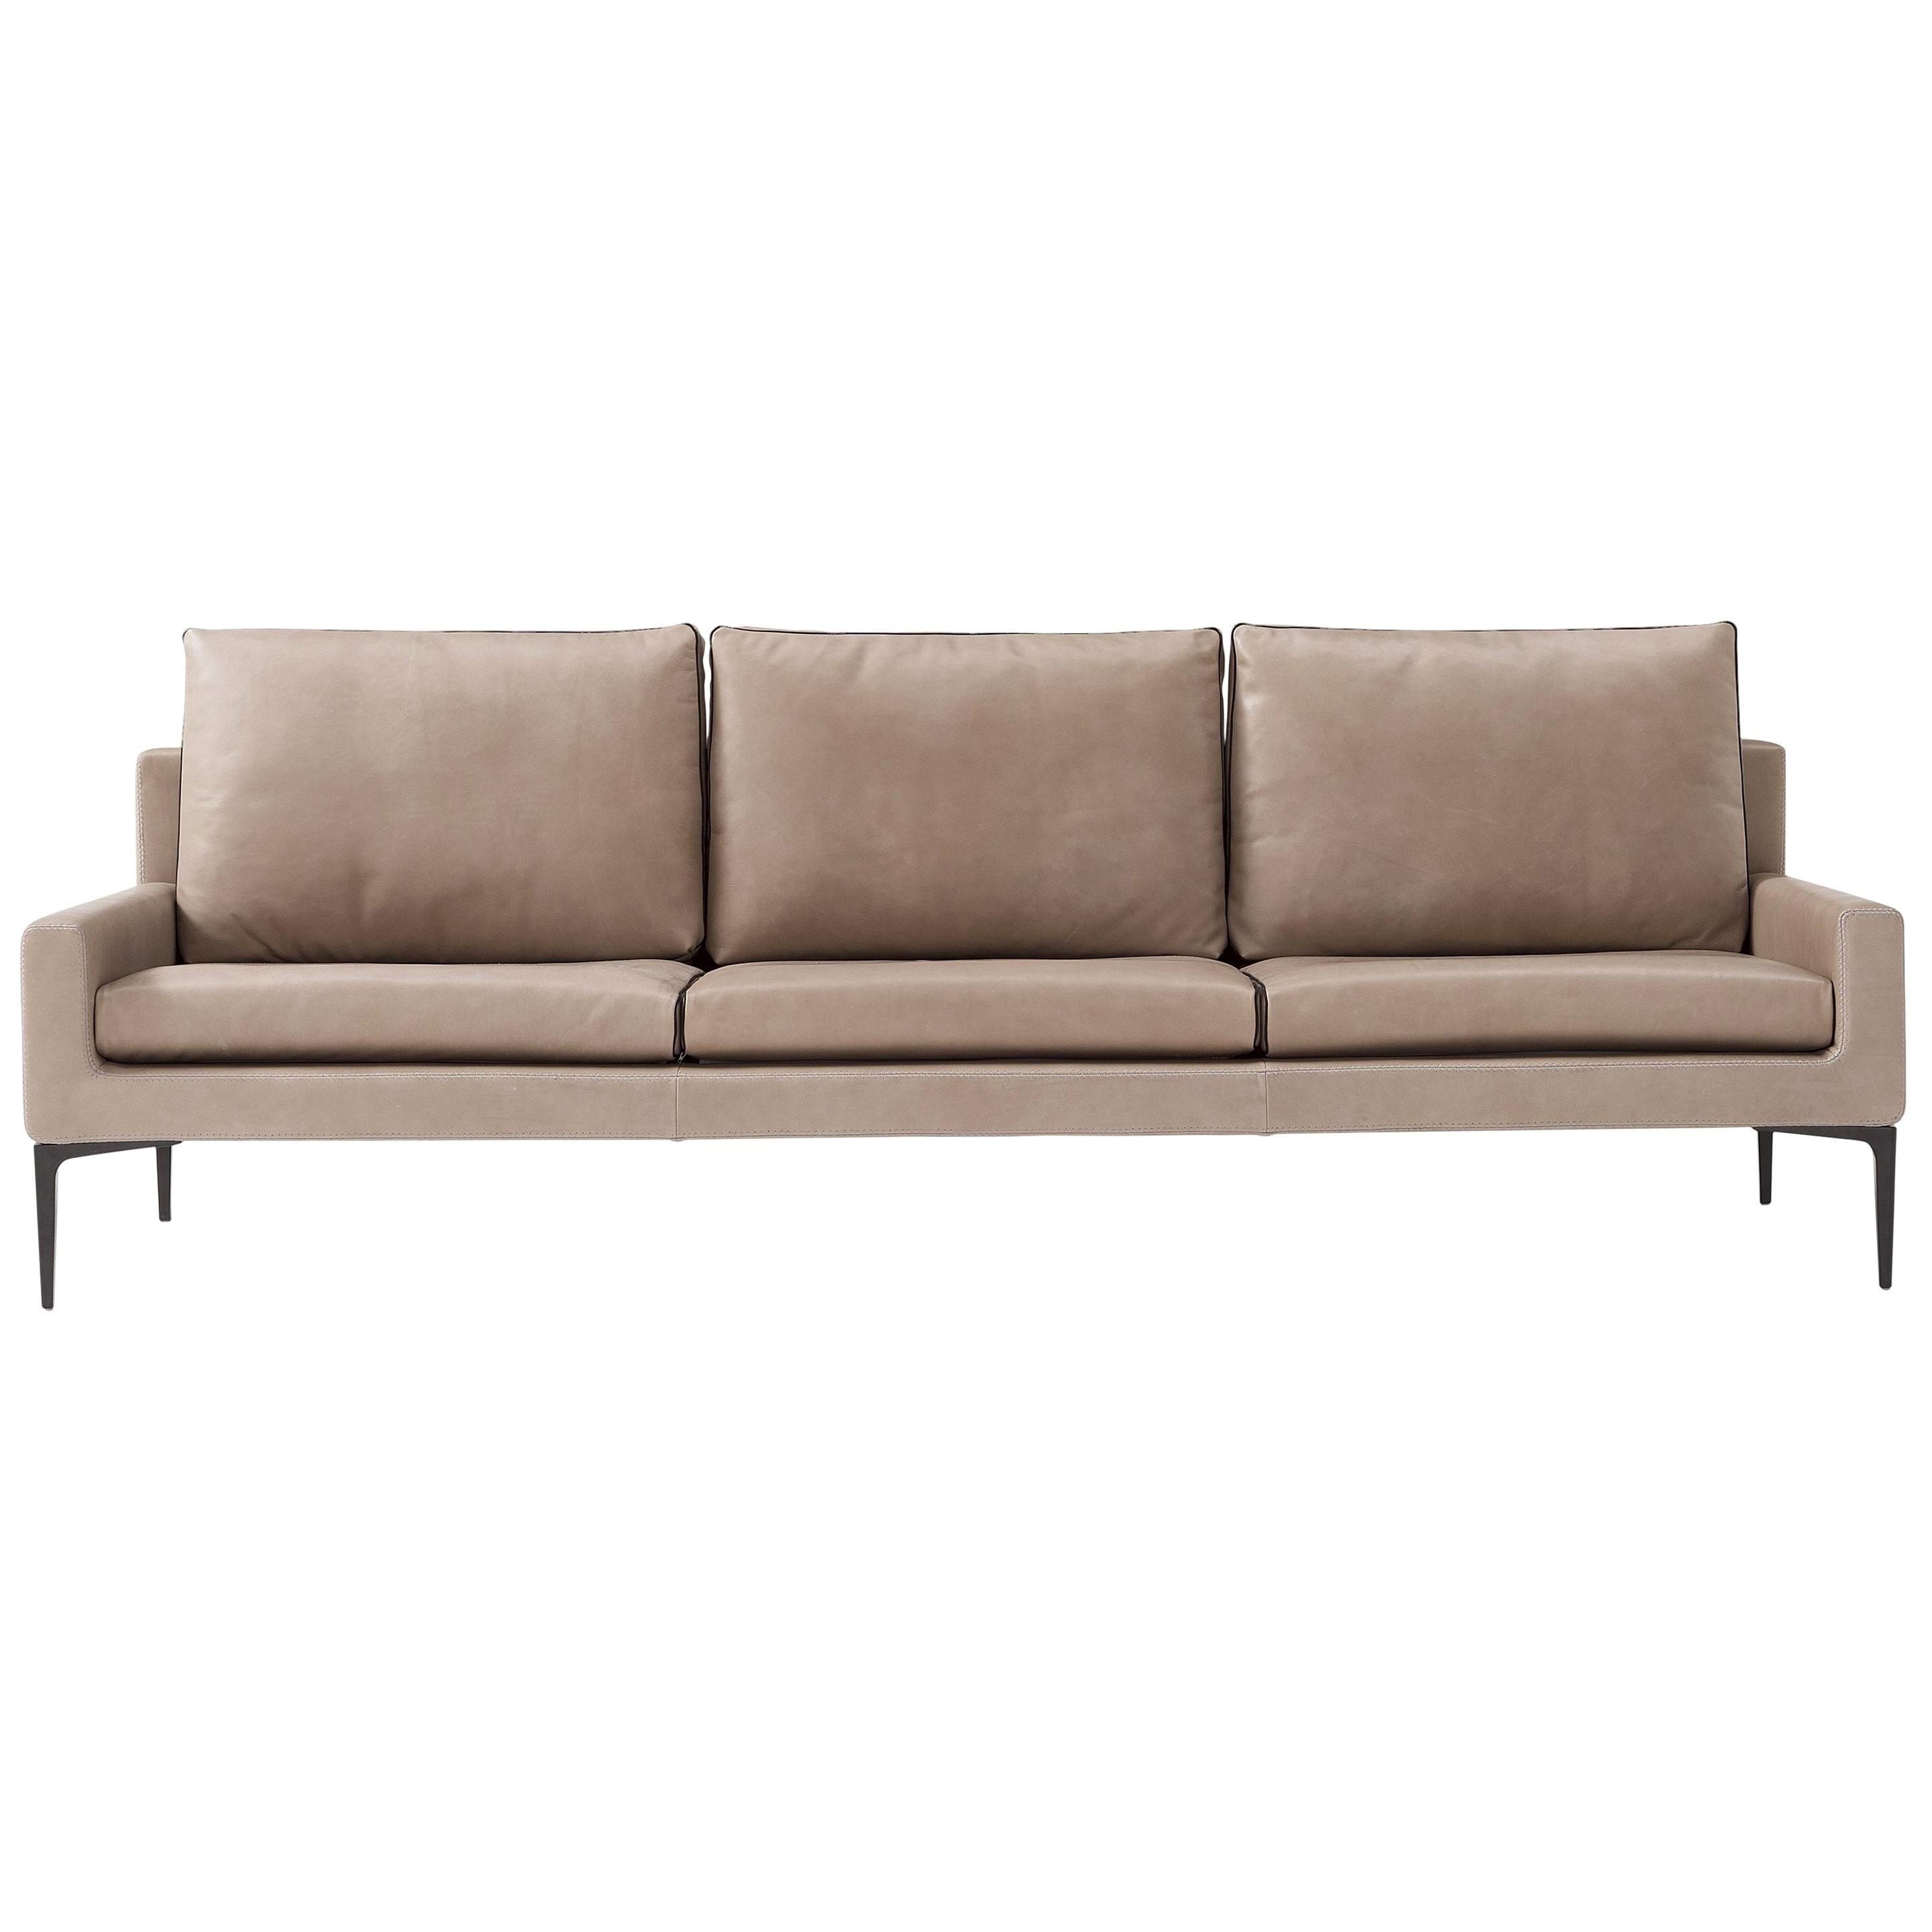 Amura 'Elsa' Three-Seat Sofa in Taupe Leather by Luca Scacchetti For Sale